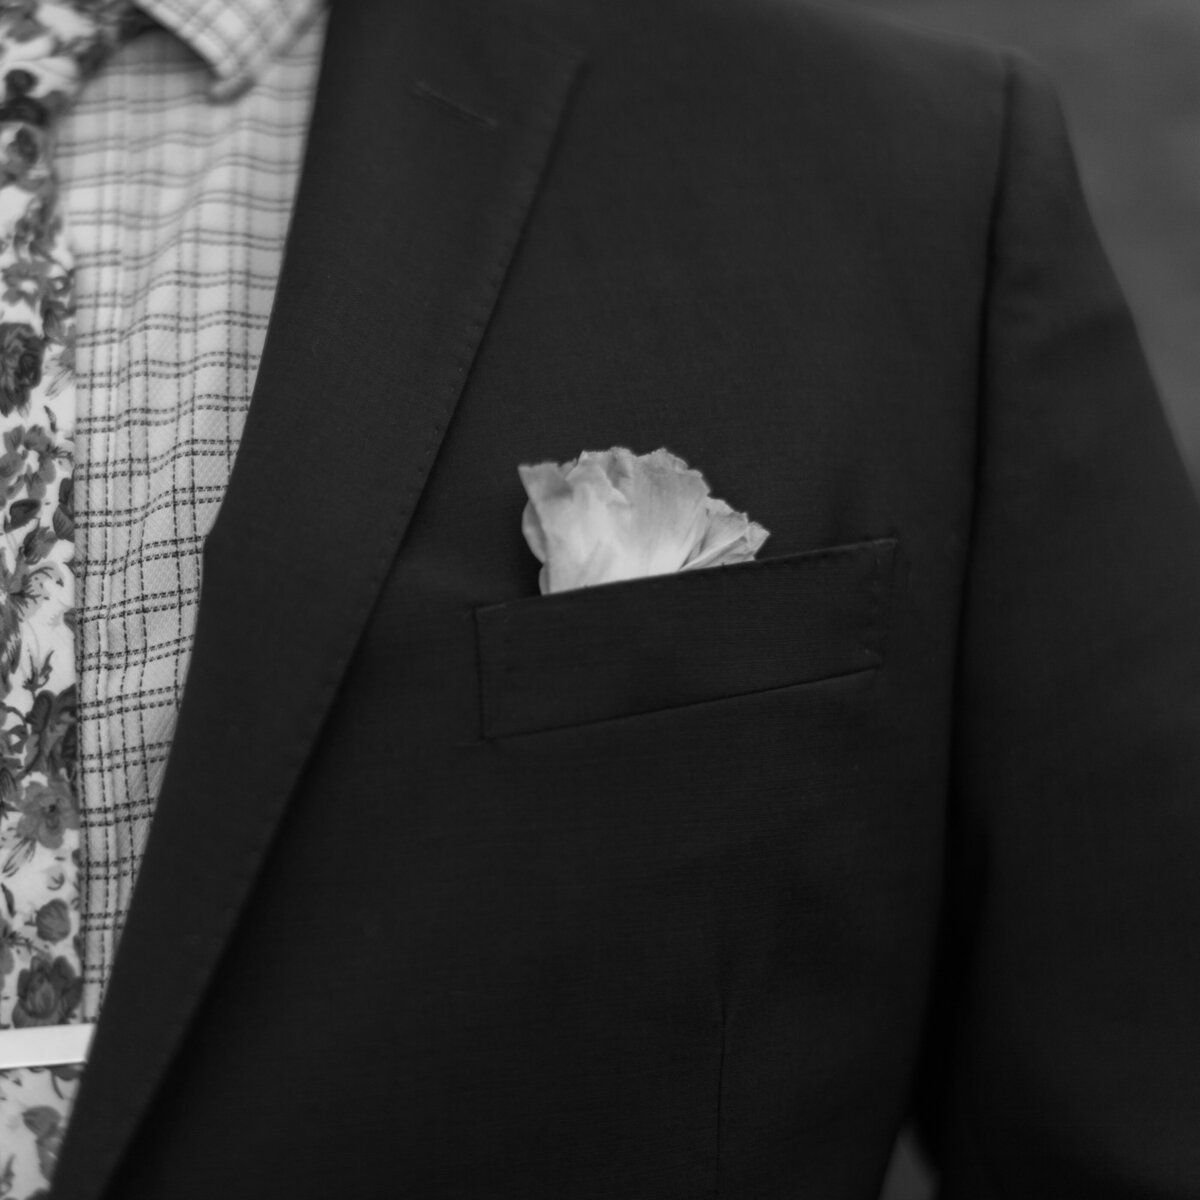 Detail photo of grooms suit